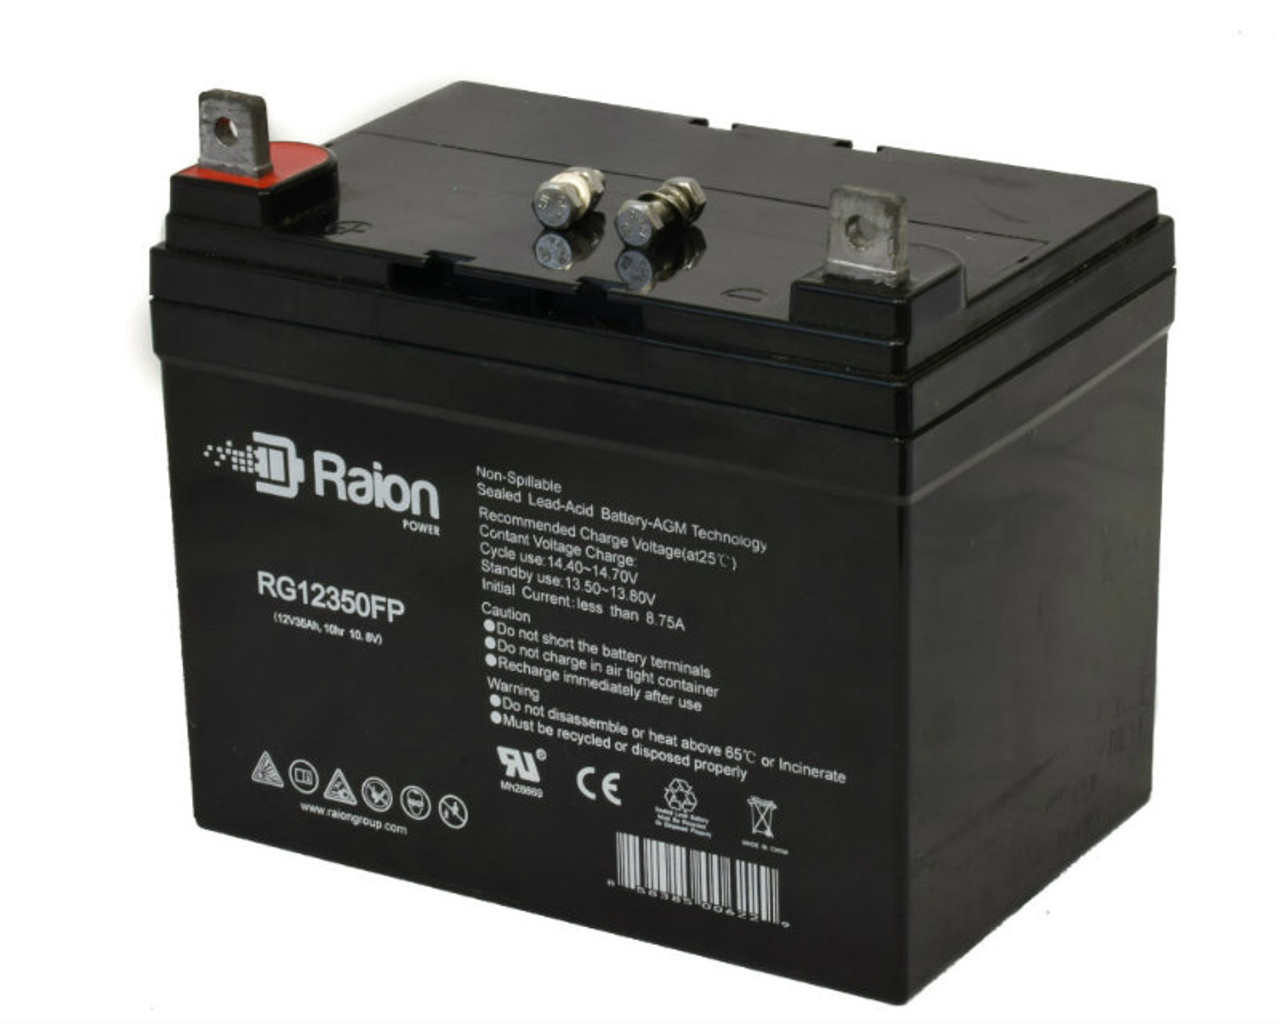 Raion Power Replacement 12V 35Ah RG12350FP Battery for Gilson GT14E